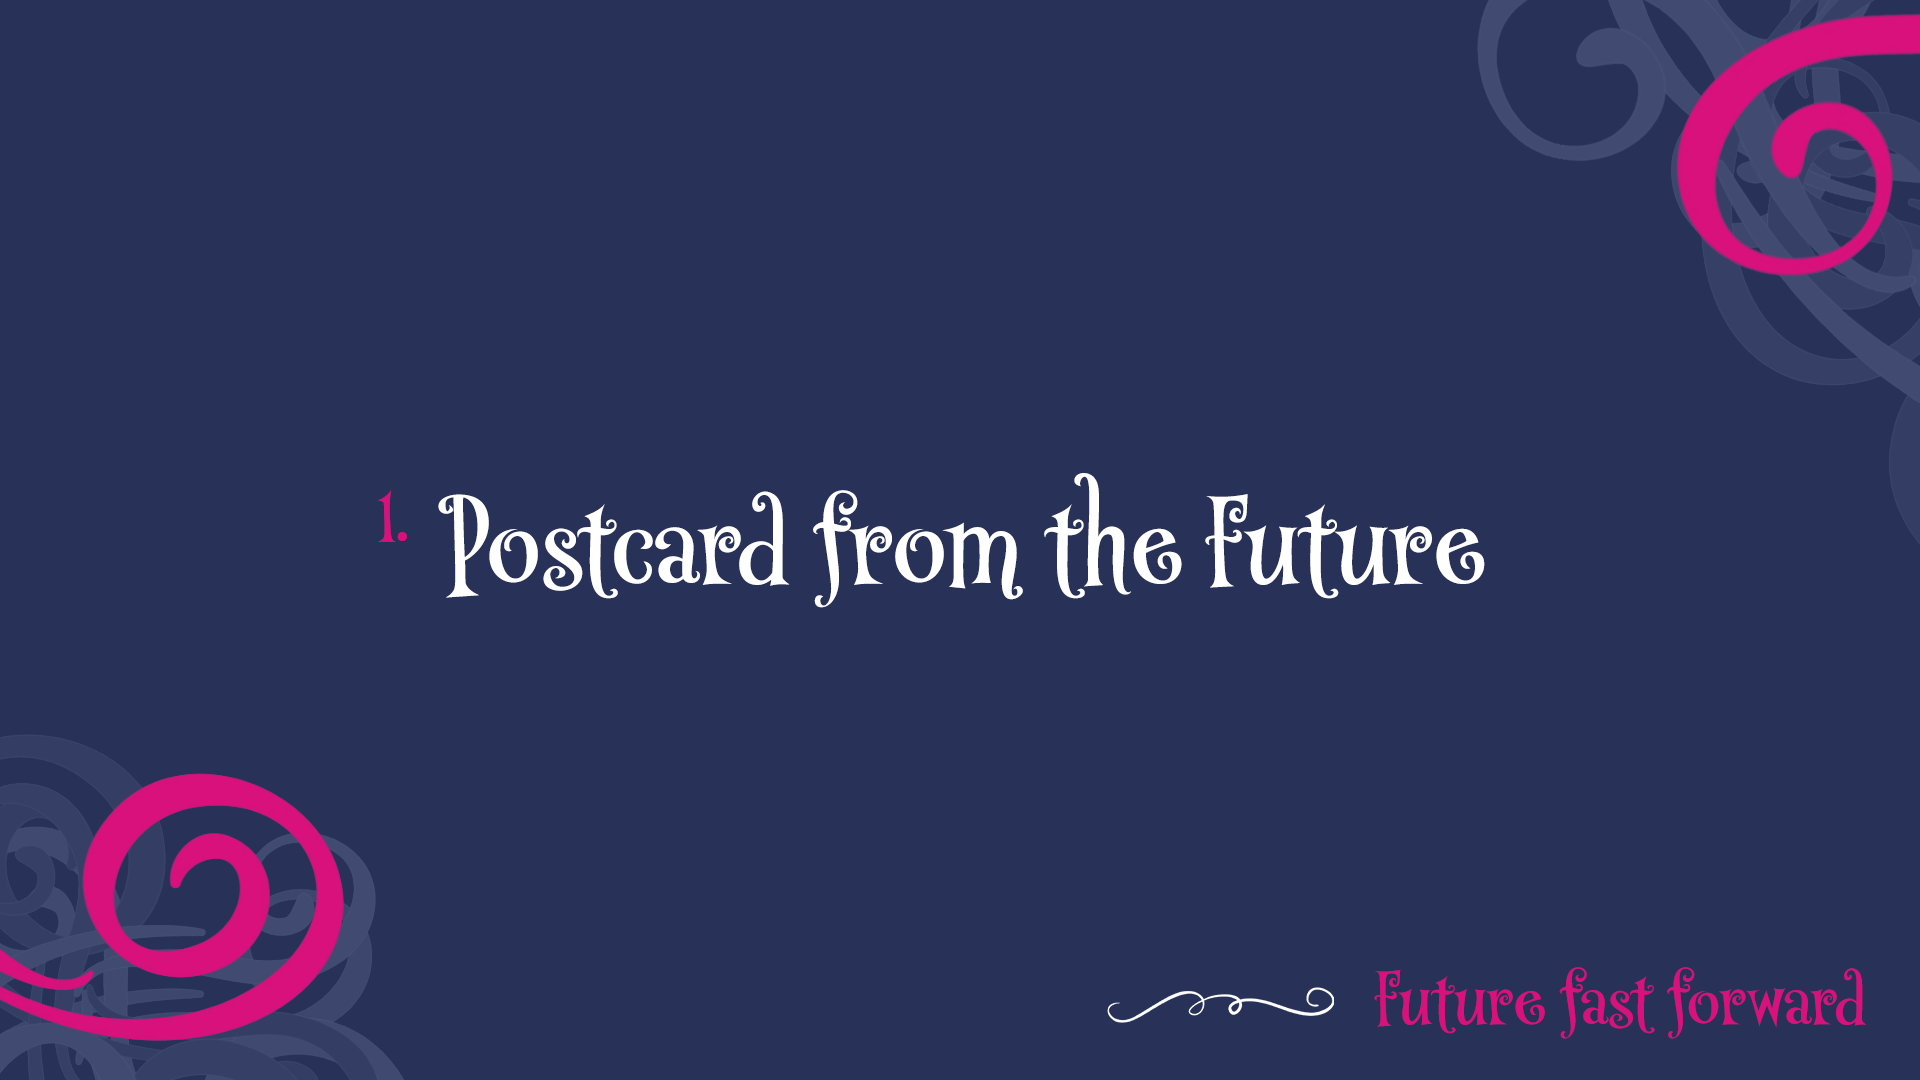 Postcard from the Future